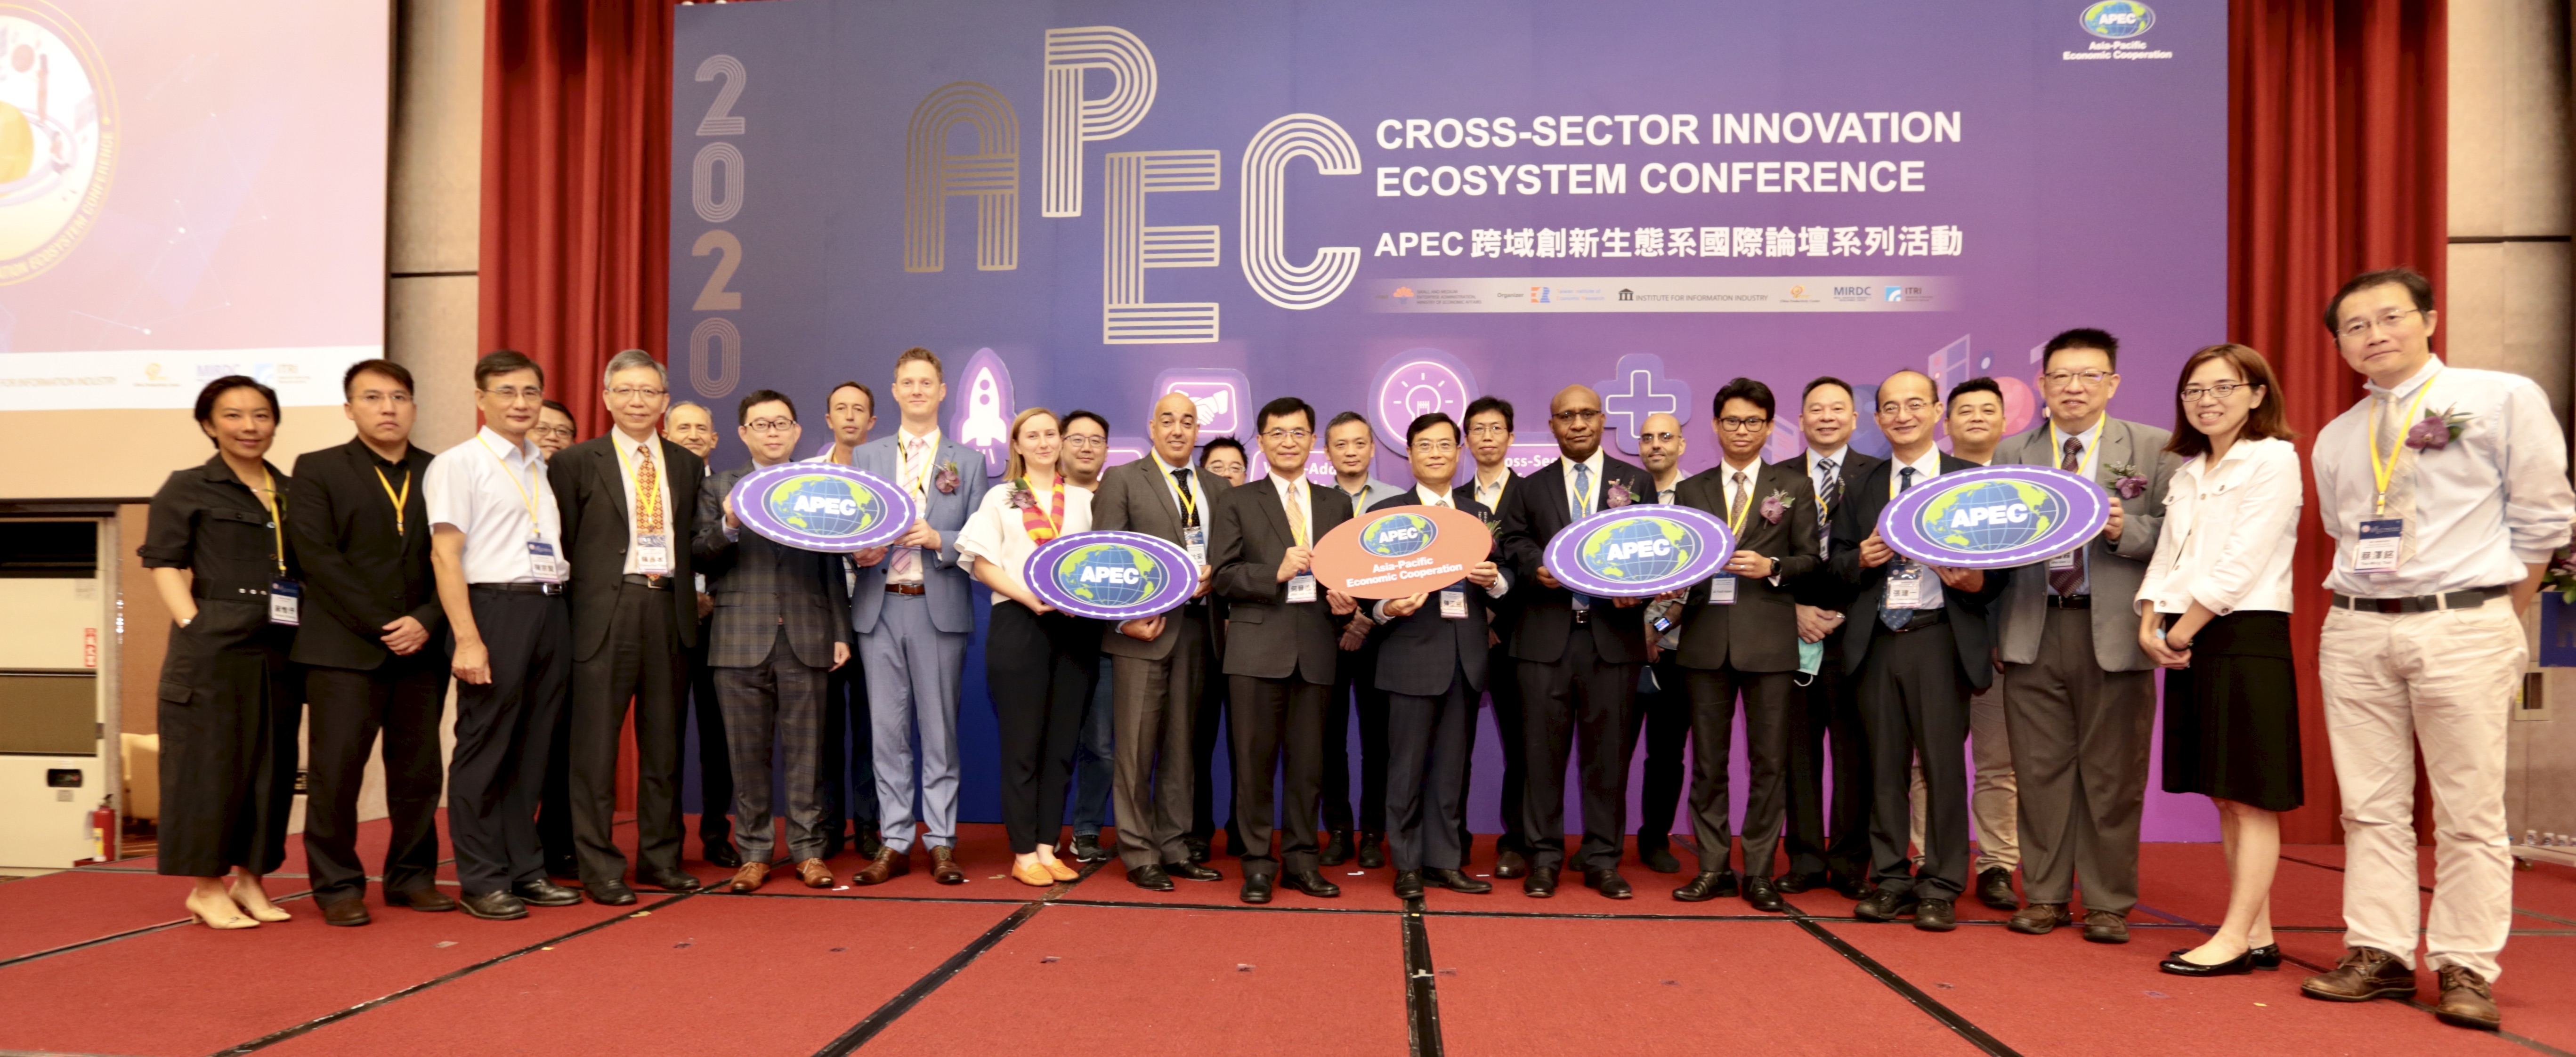 2020 APEC Cross-Sector Innovation Ecosystem Conference_Taipei_August